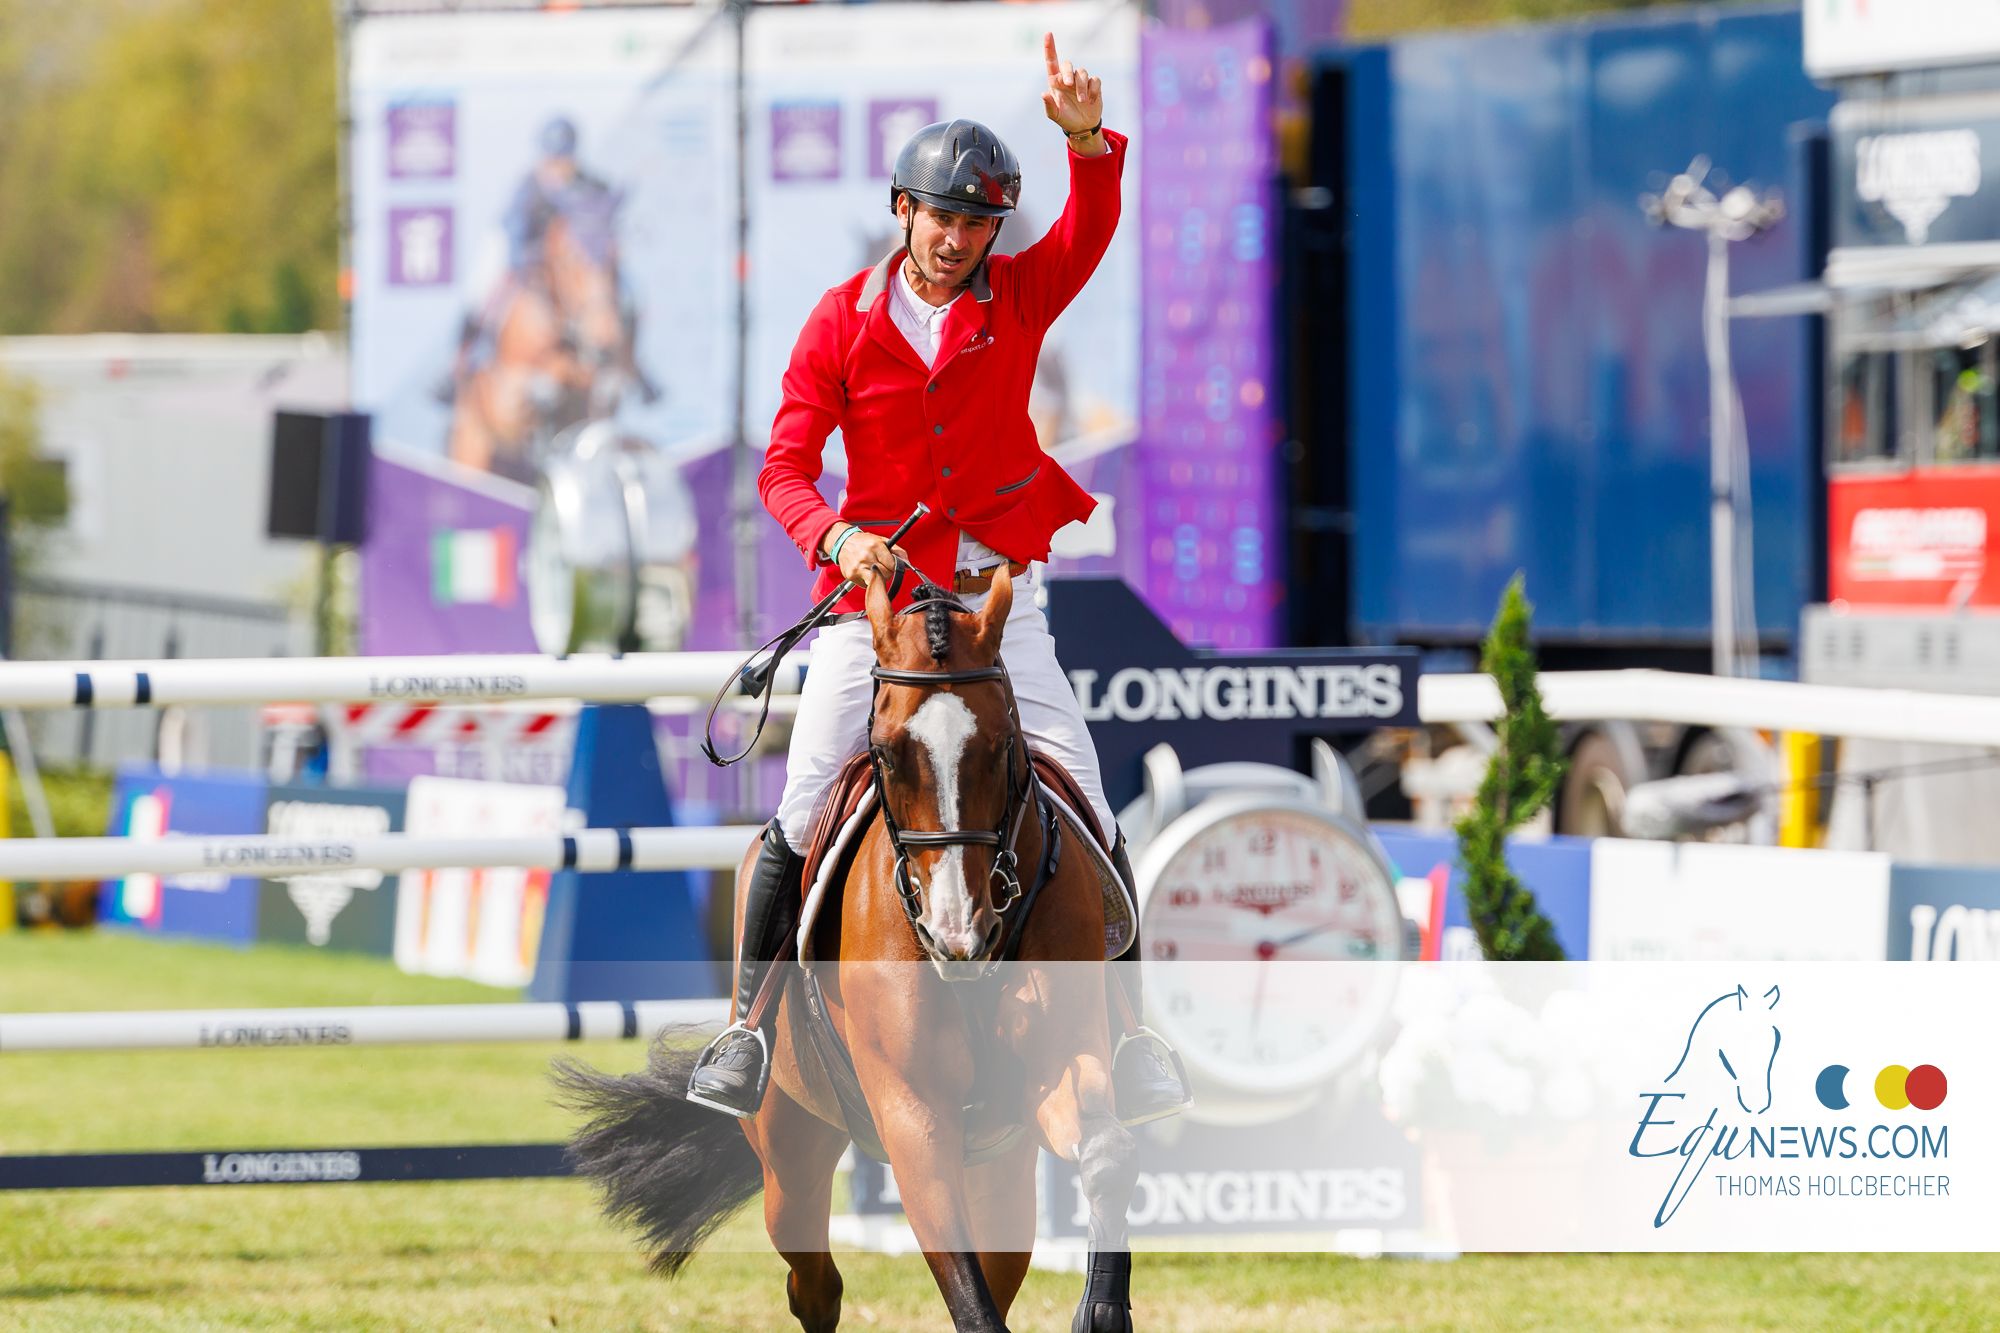 Steve Guerdat on handling pressure: "The only one I've to prove myself to is my horse..."